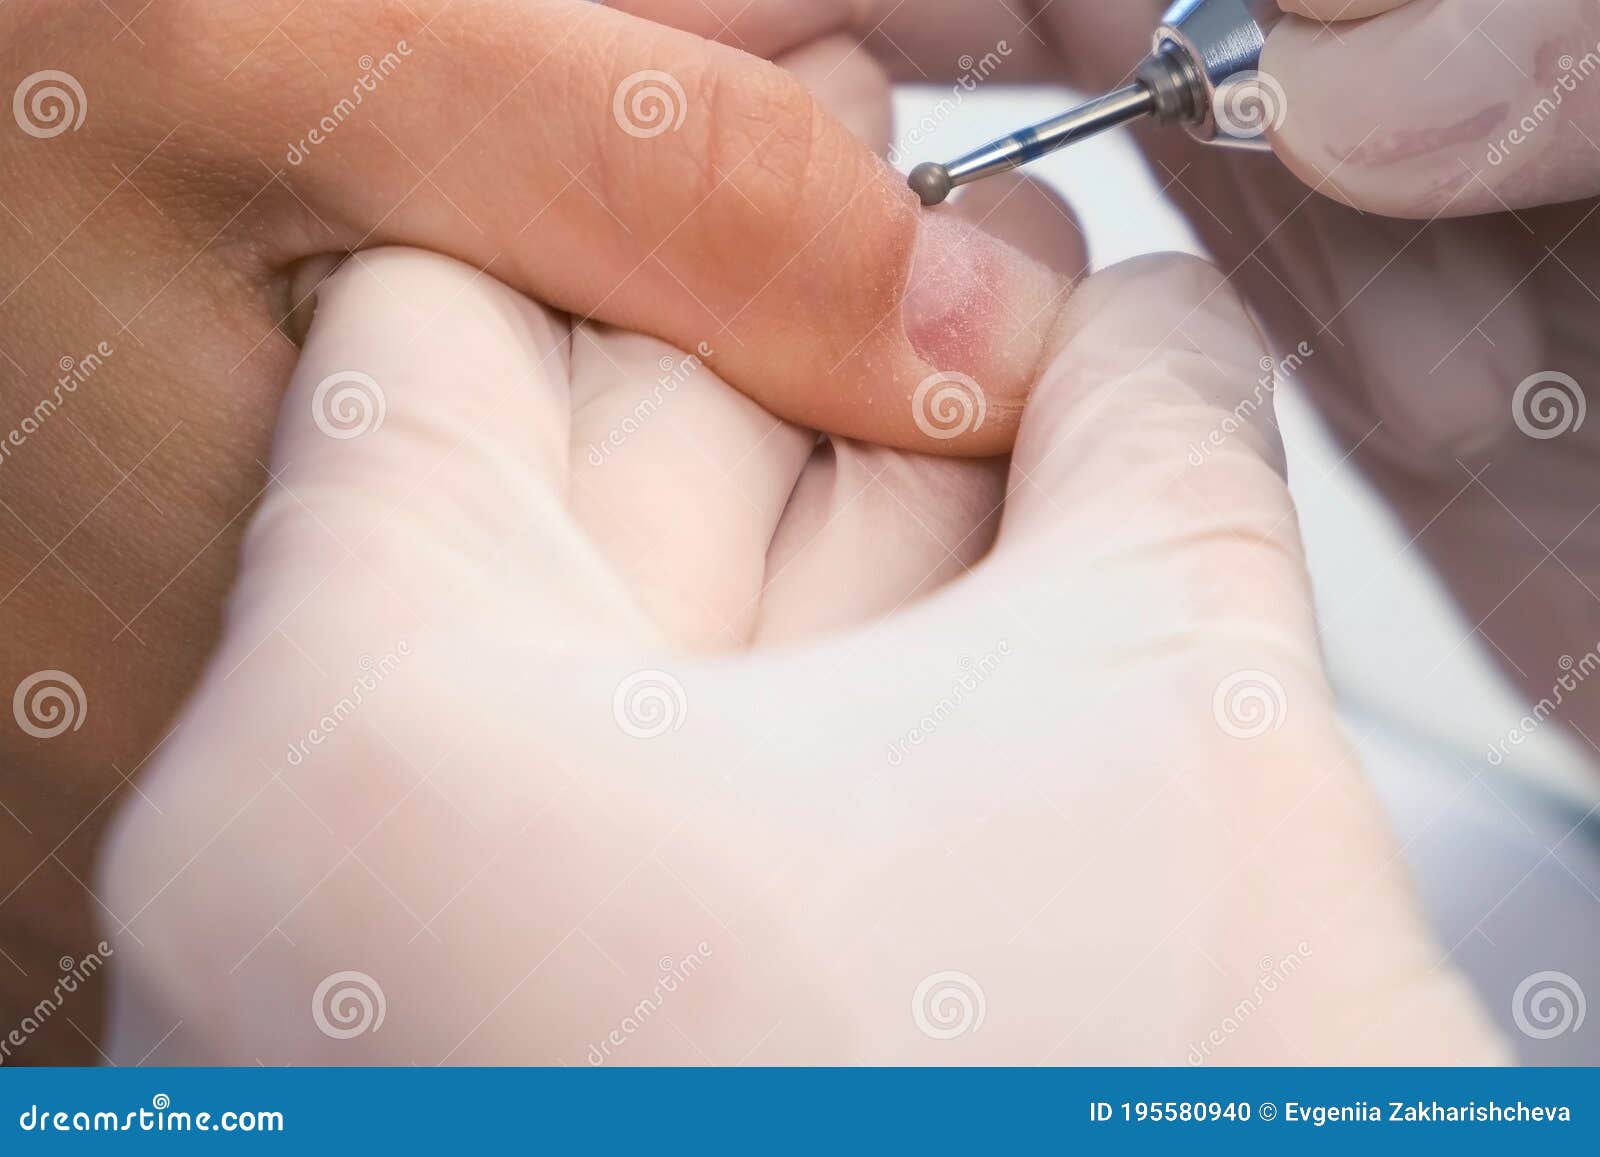 woman manicurist removing cuticle and pterygium using apparatus, closeup view.